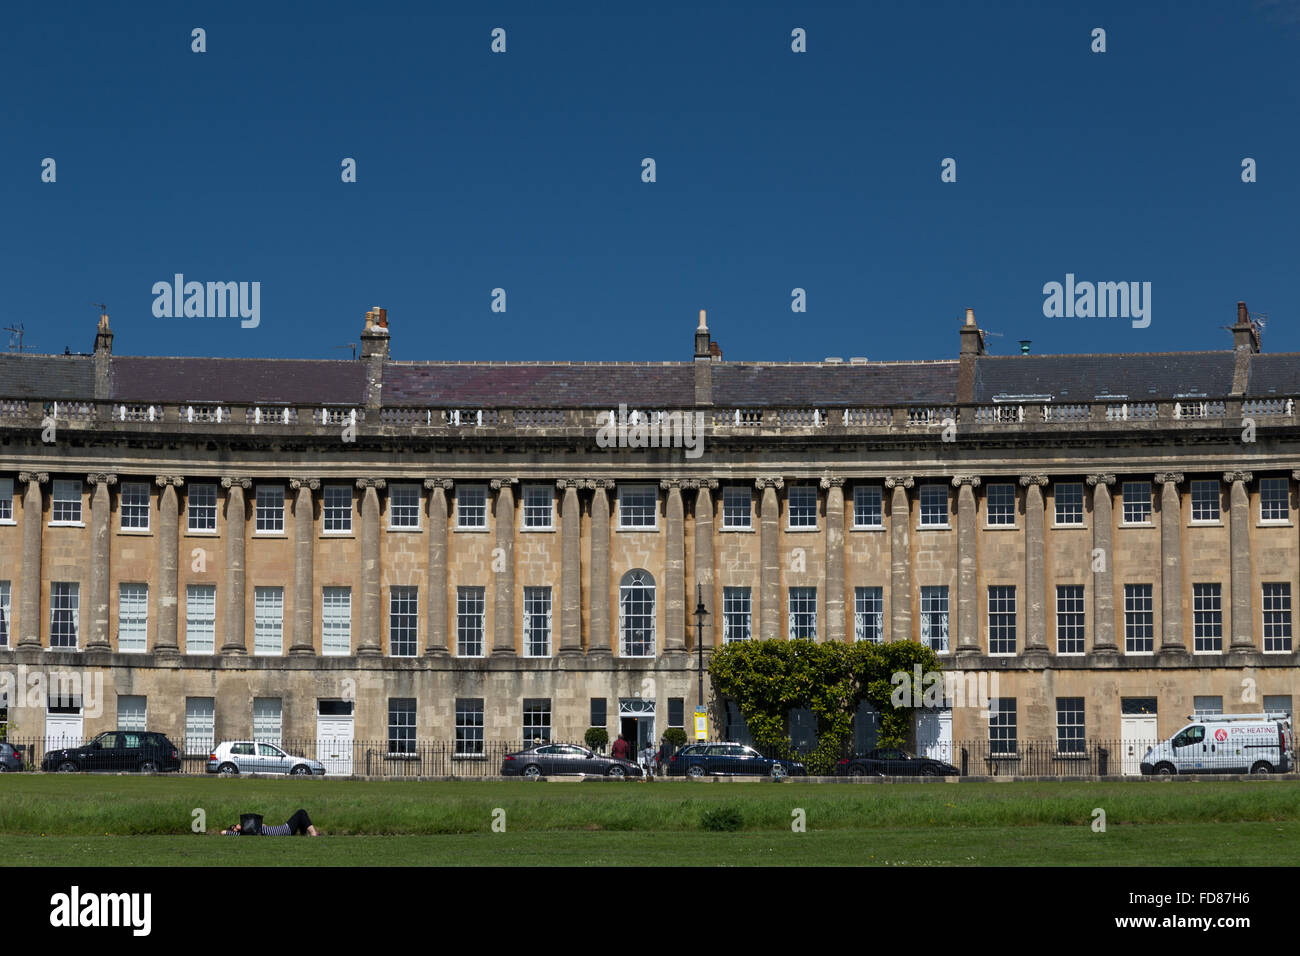 The Royal Crescent Hotel, The City of Bath, Roman World Heritage Site, Somerset, BANES, UK Stock Photo